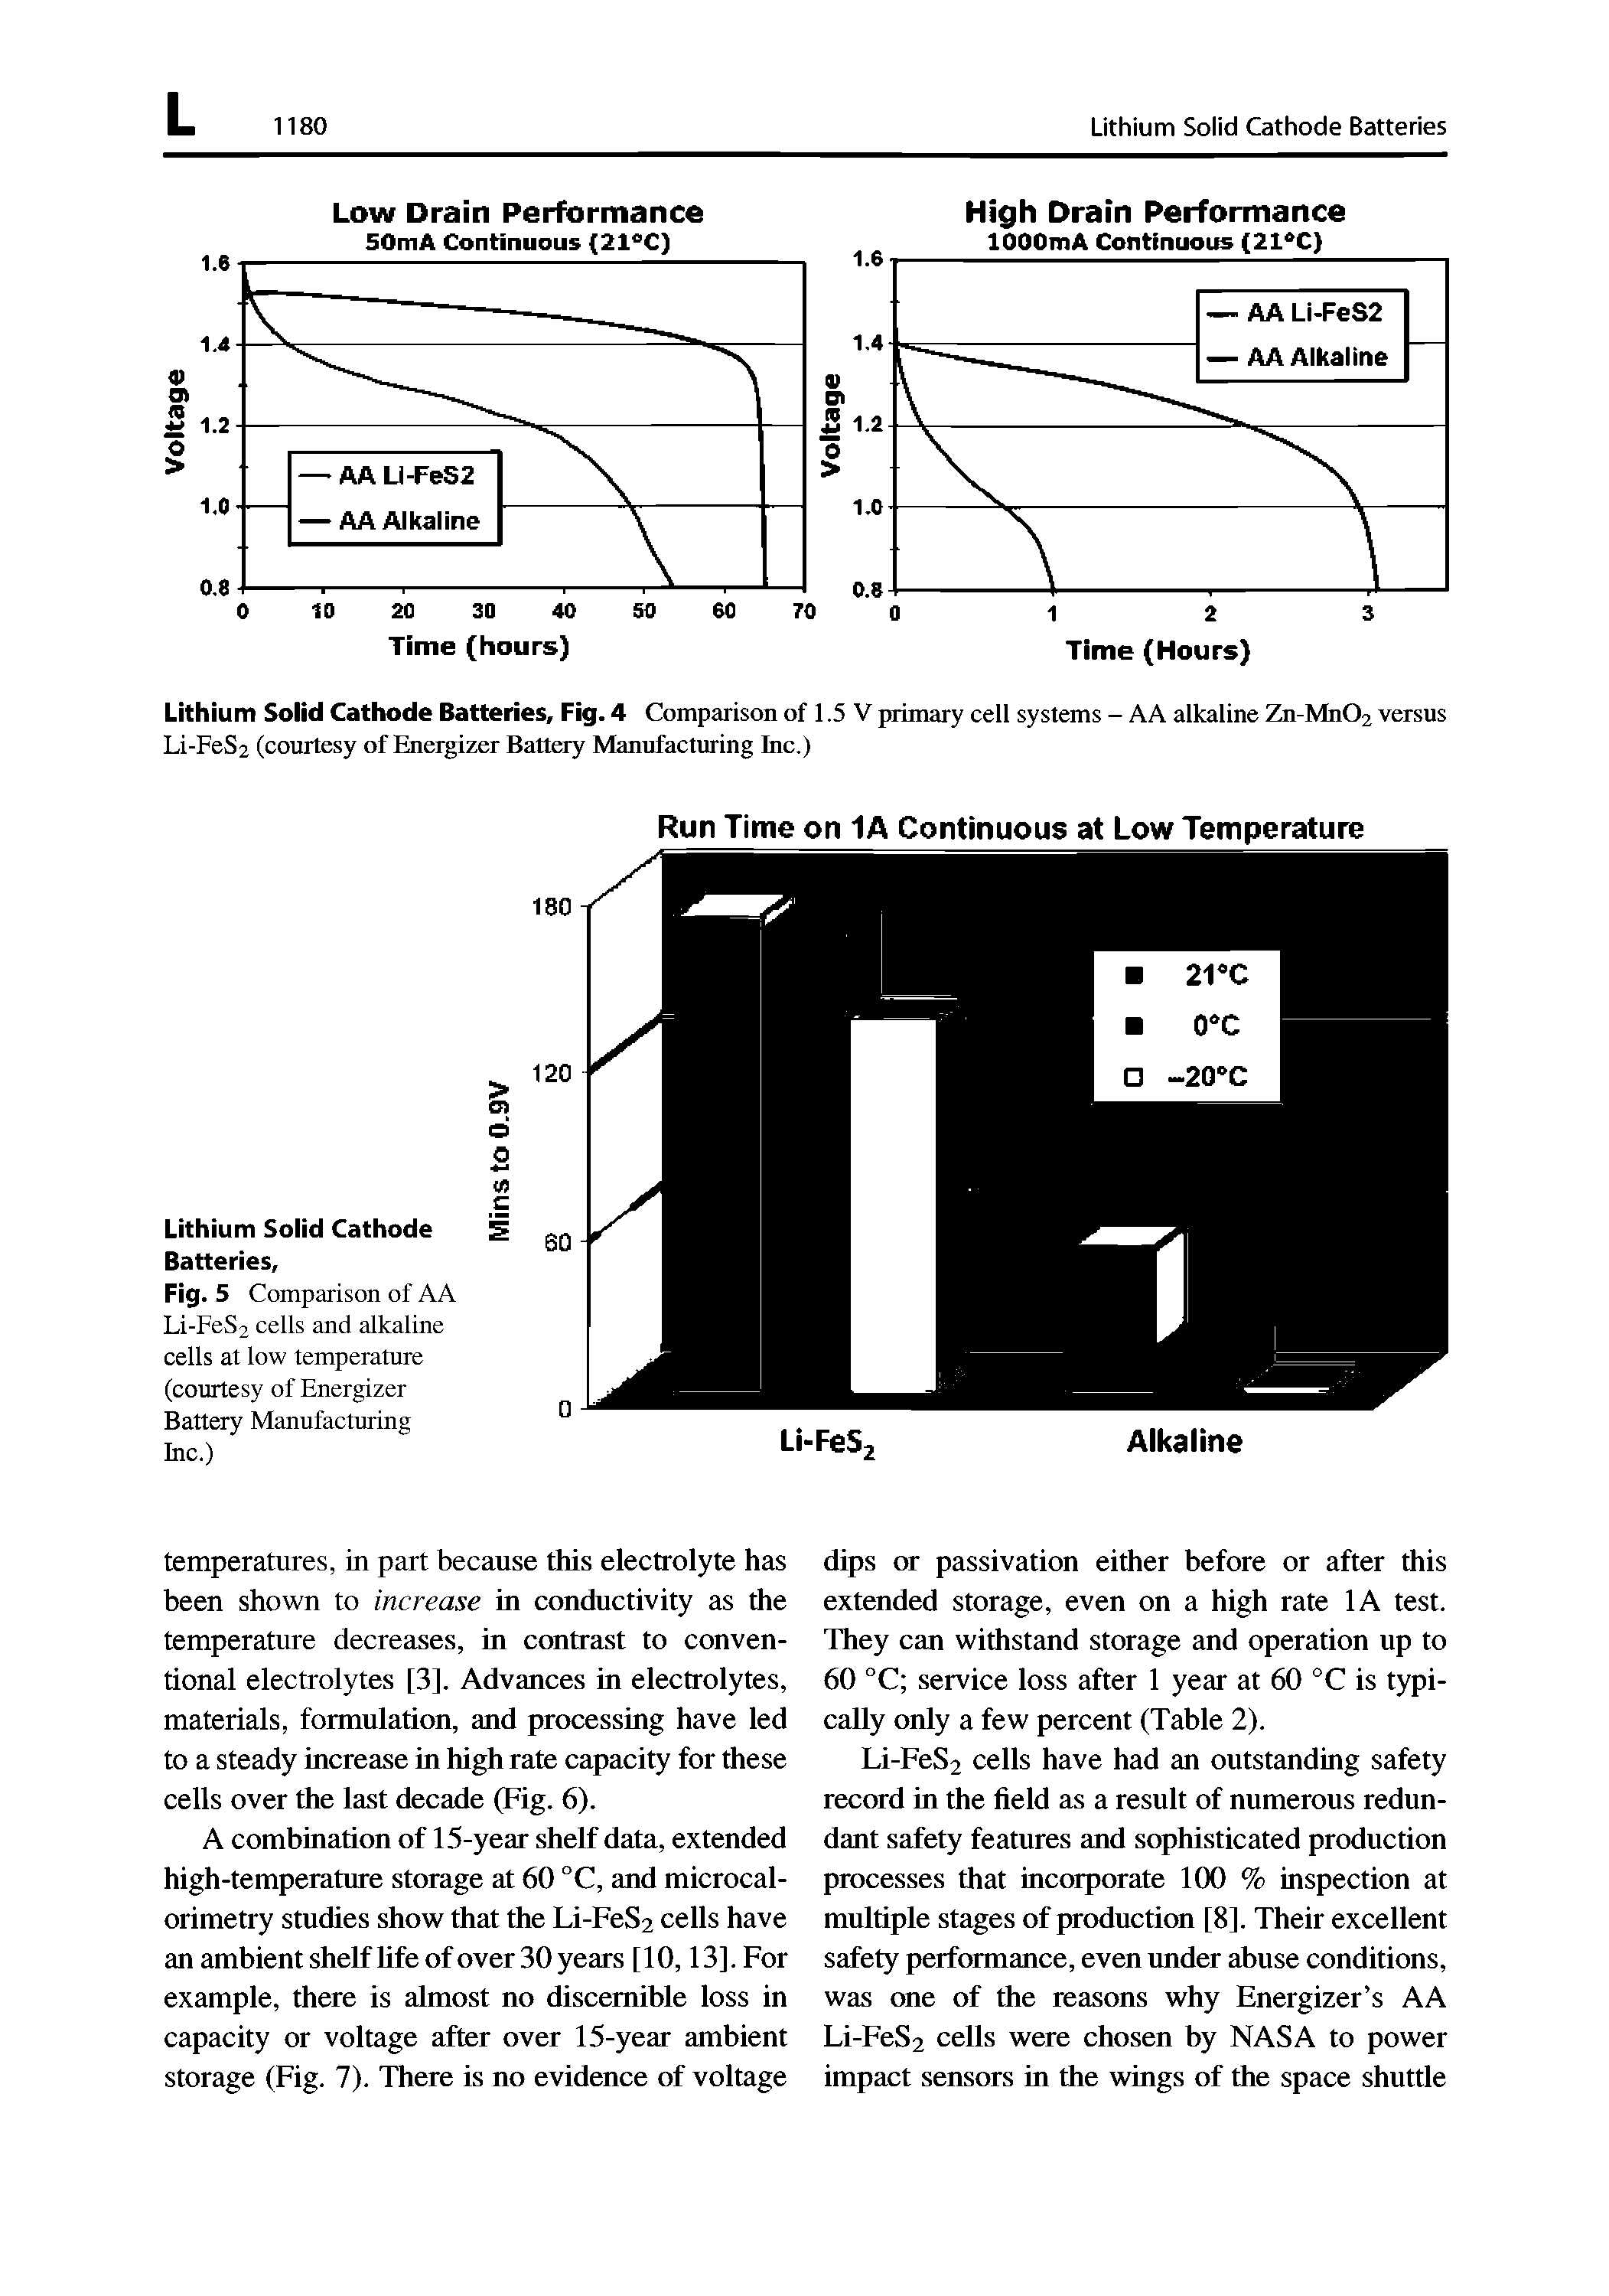 Fig. 5 Comparison of AA Li-FeS2 cells and alkaline cells at low temperature (courtesy of Energizer Battery Manufacturing Inc.)...